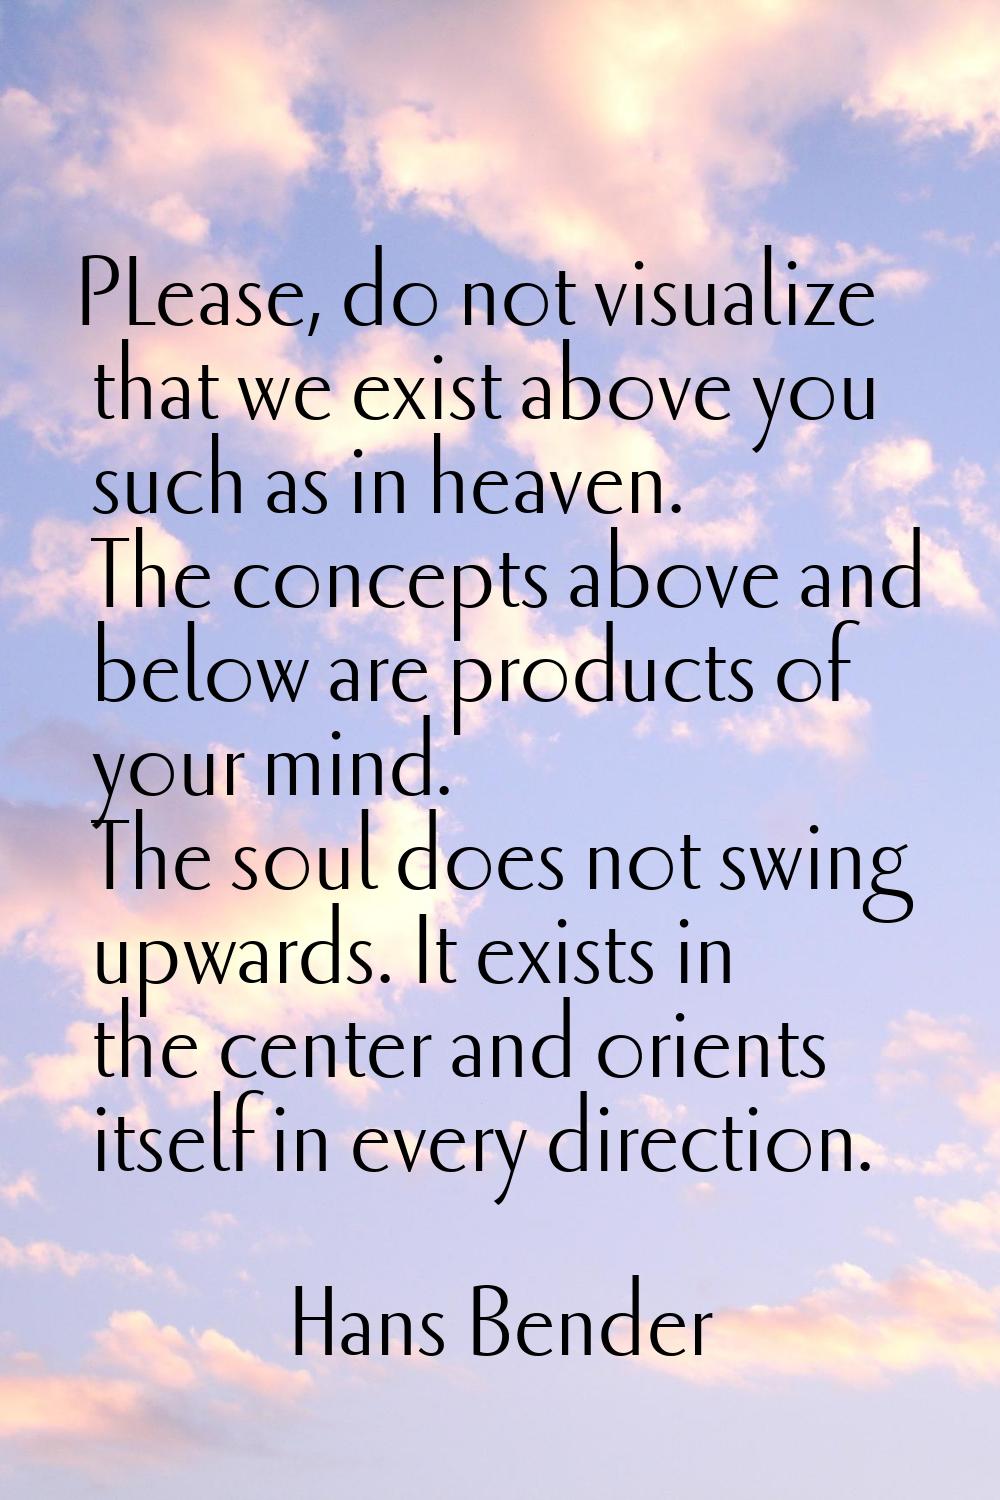 PLease, do not visualize that we exist above you such as in heaven. The concepts above and below ar